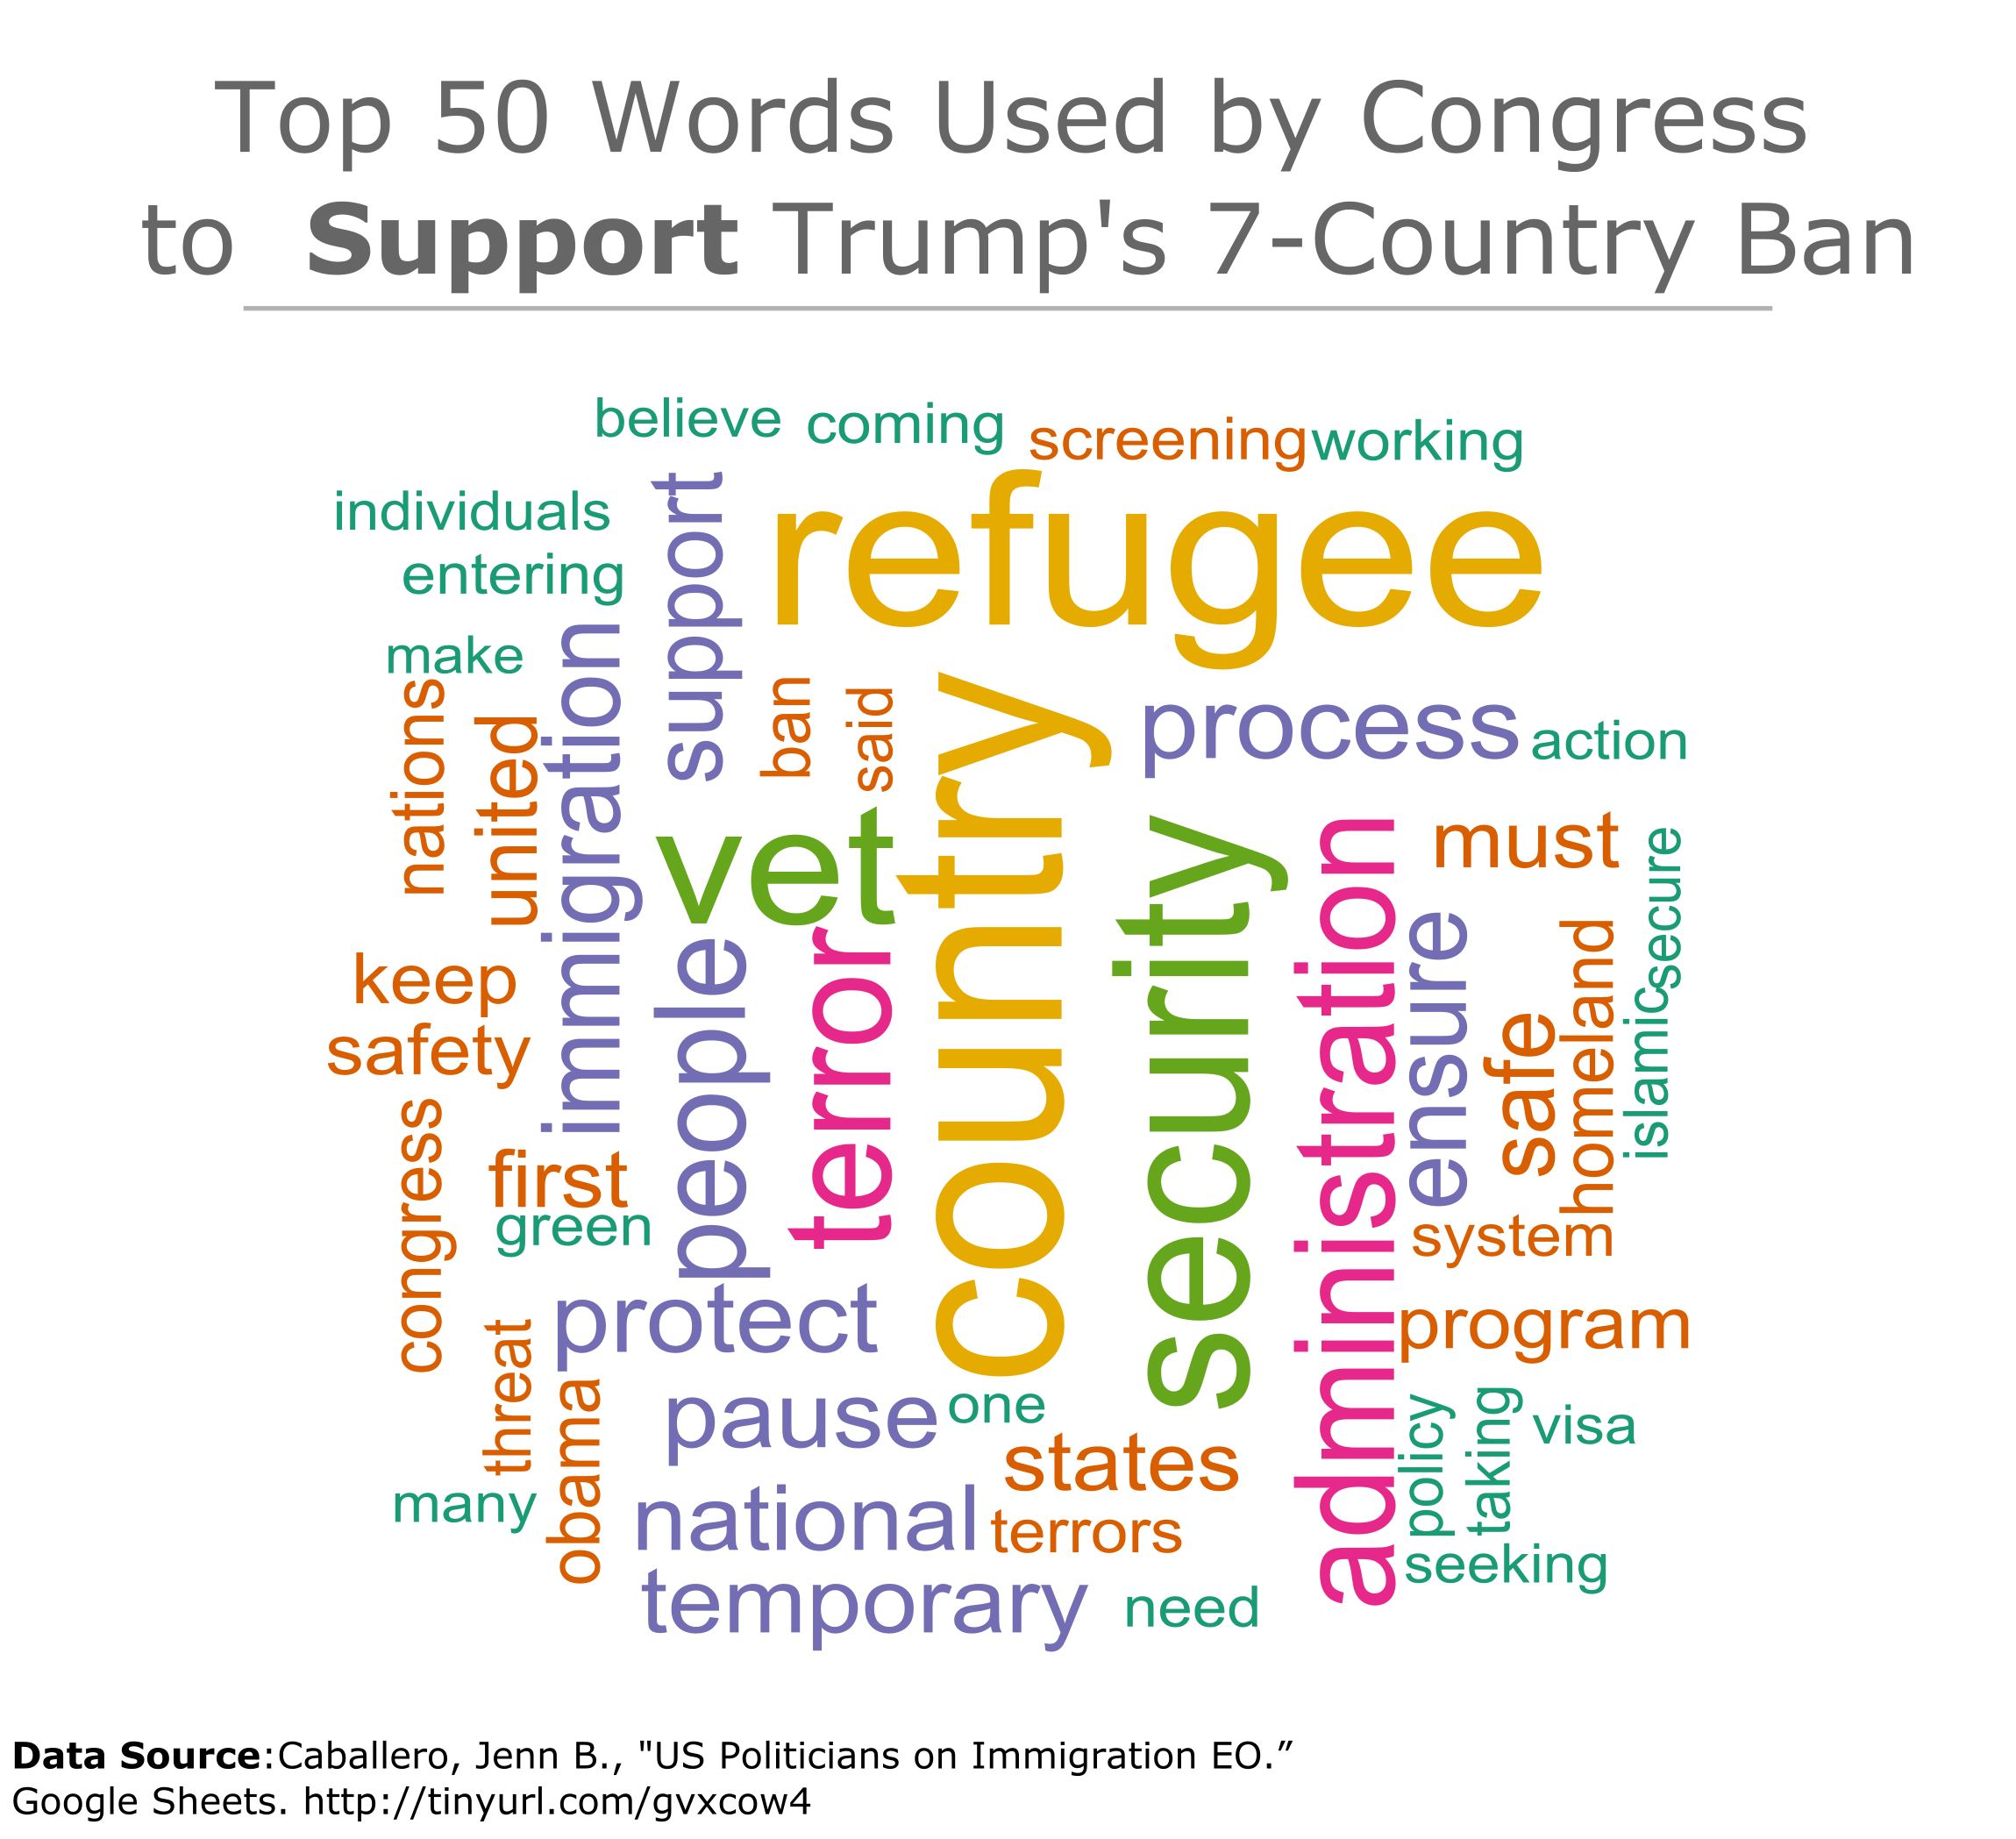 Top 50 Words Used by Congress to Support Trump's 7-Country Ban